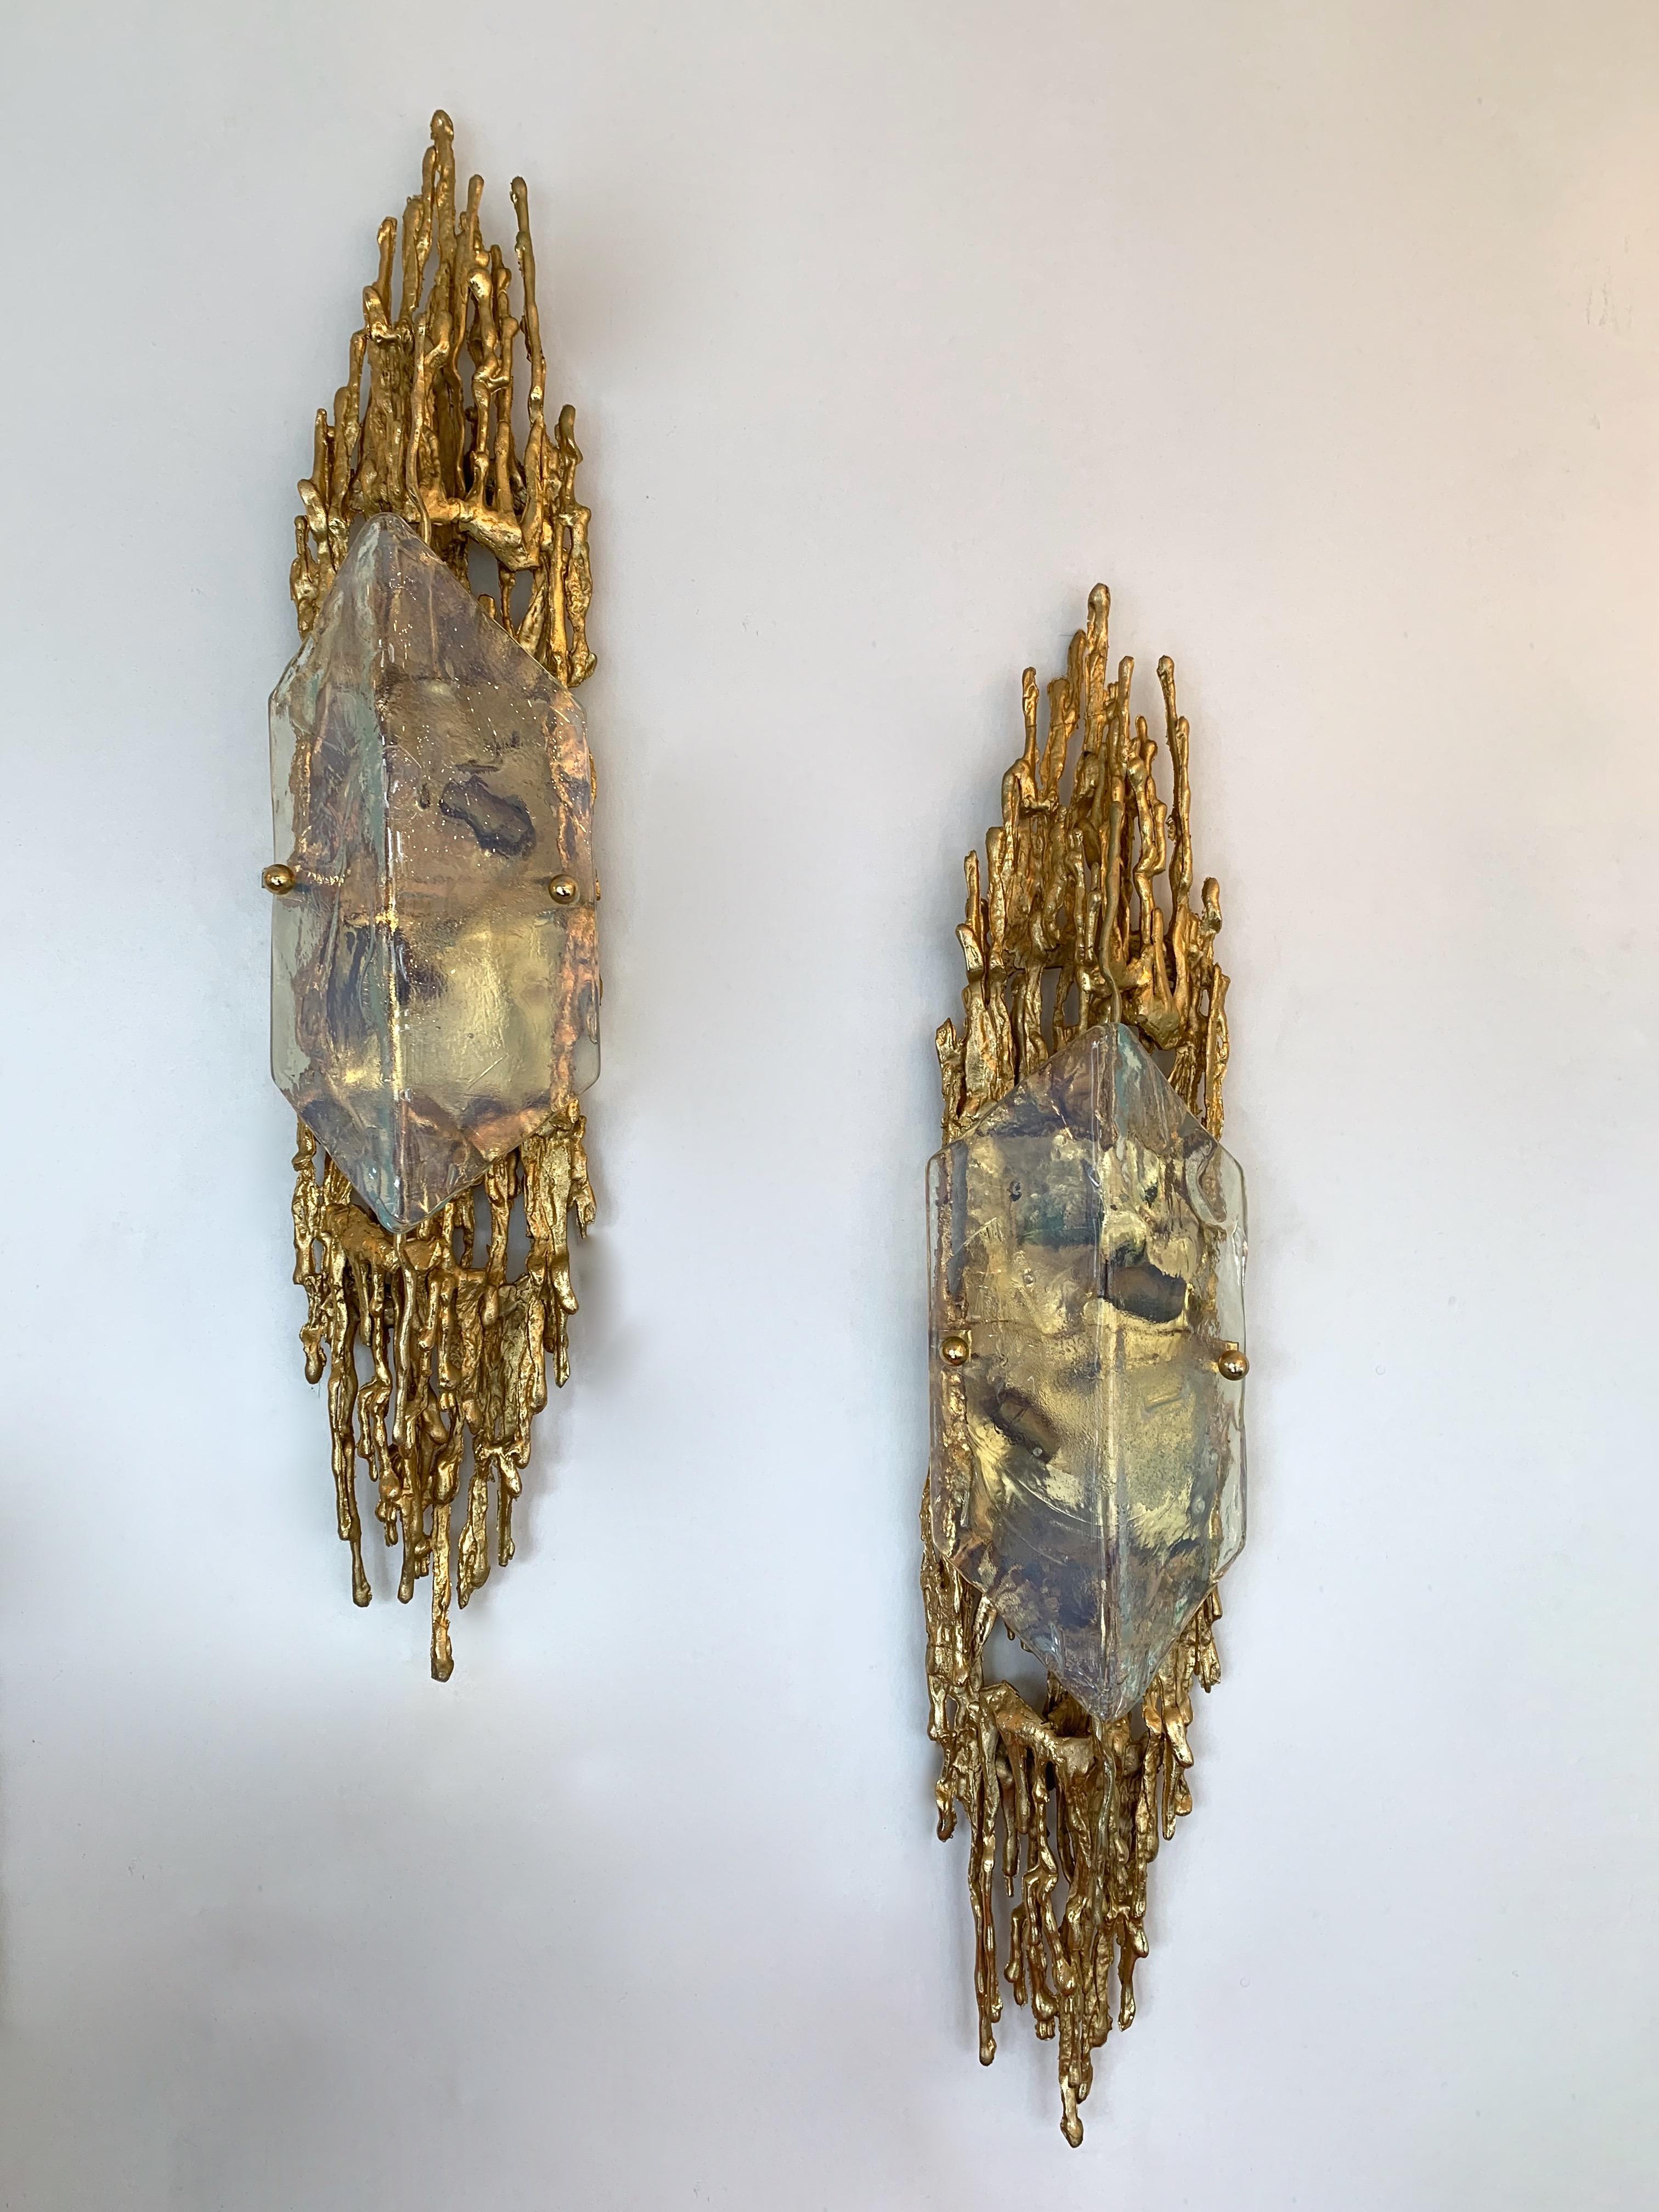 Rare and large pair of gilt bronze wall light sconces, opale Murano glass diffusor. Unique and singular technique used by Boeltz and called by him 